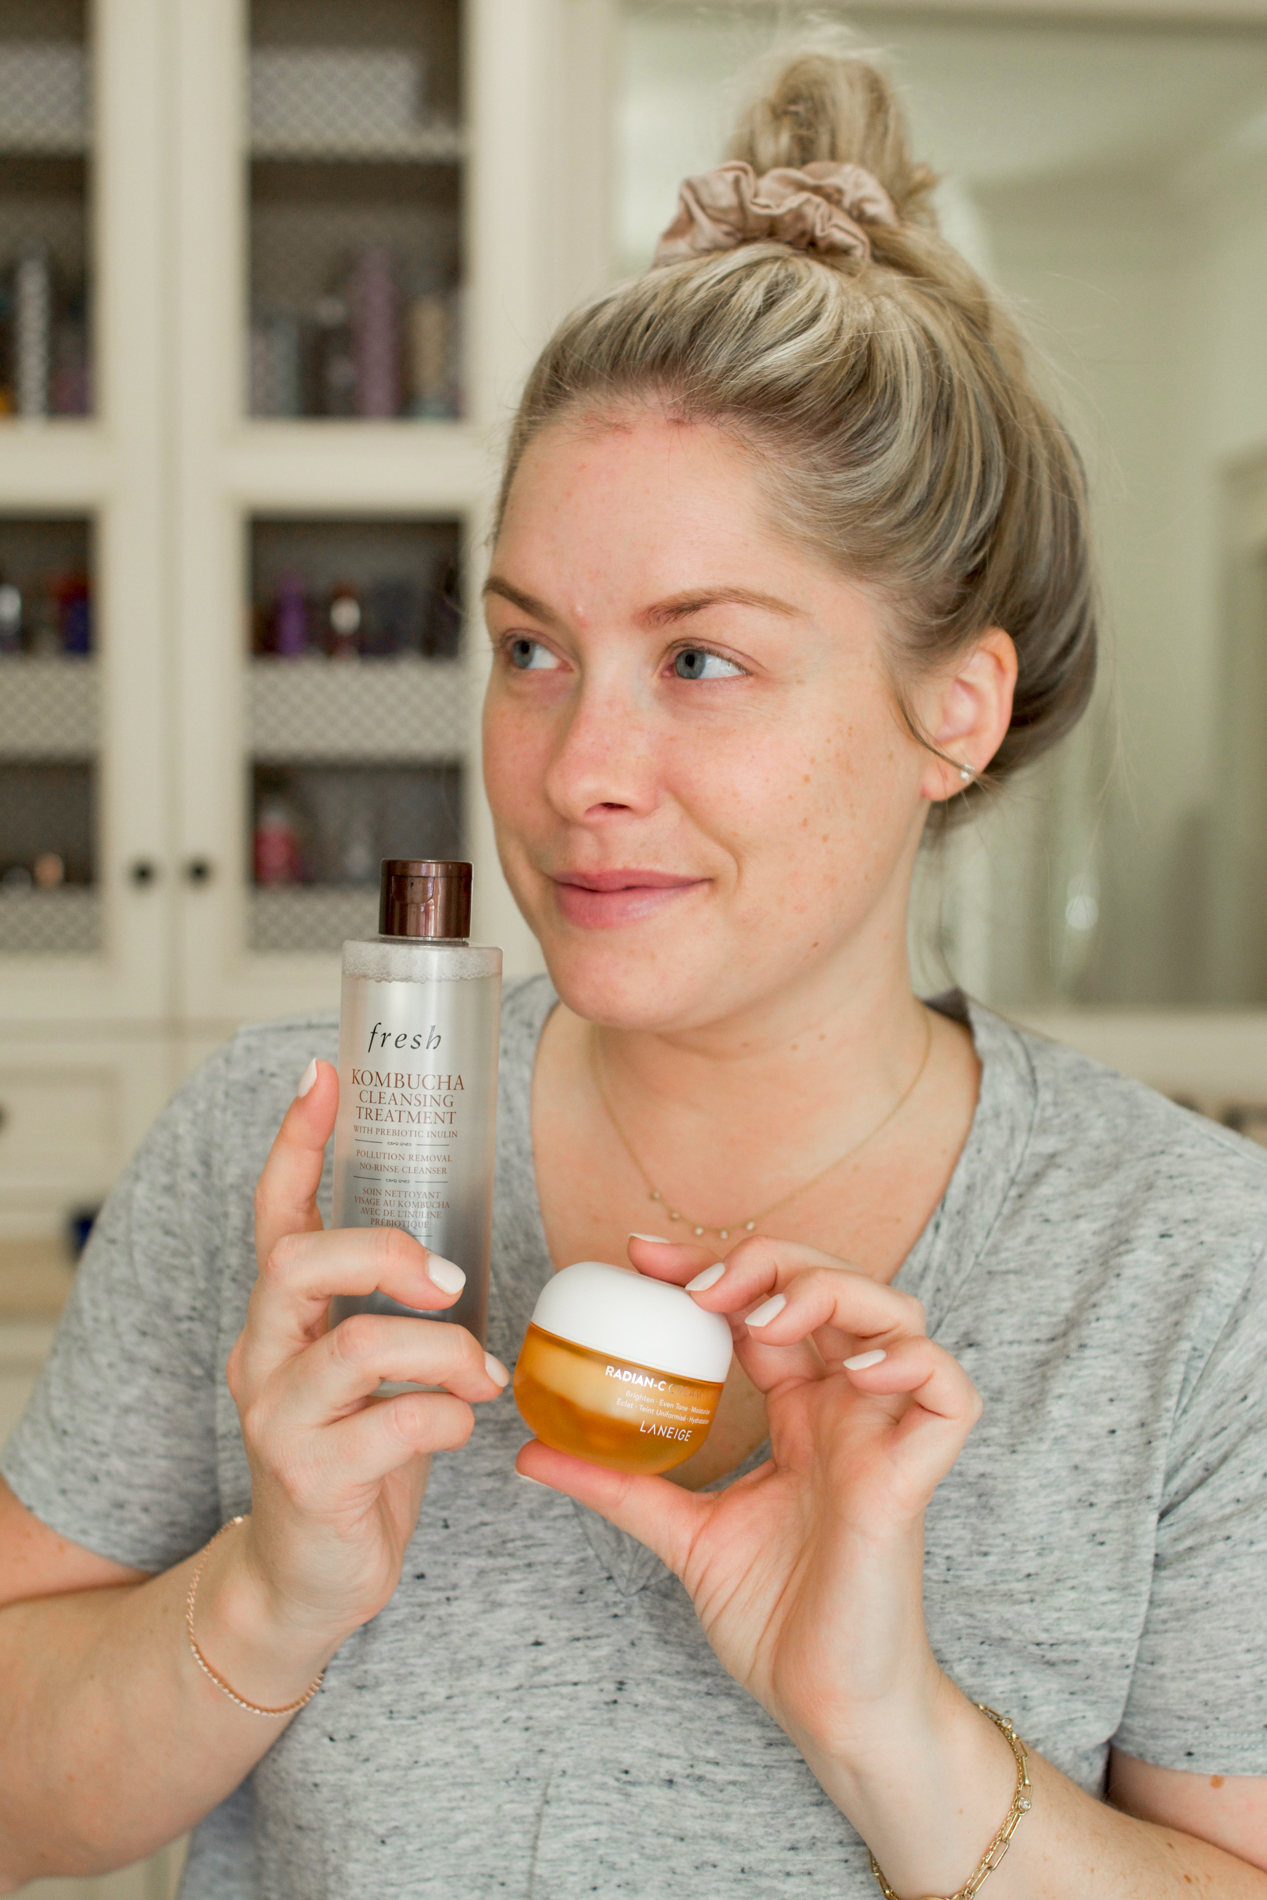 New Year, New Skin Goals" Me too. Read about what I’m focusing on for my skin right now!